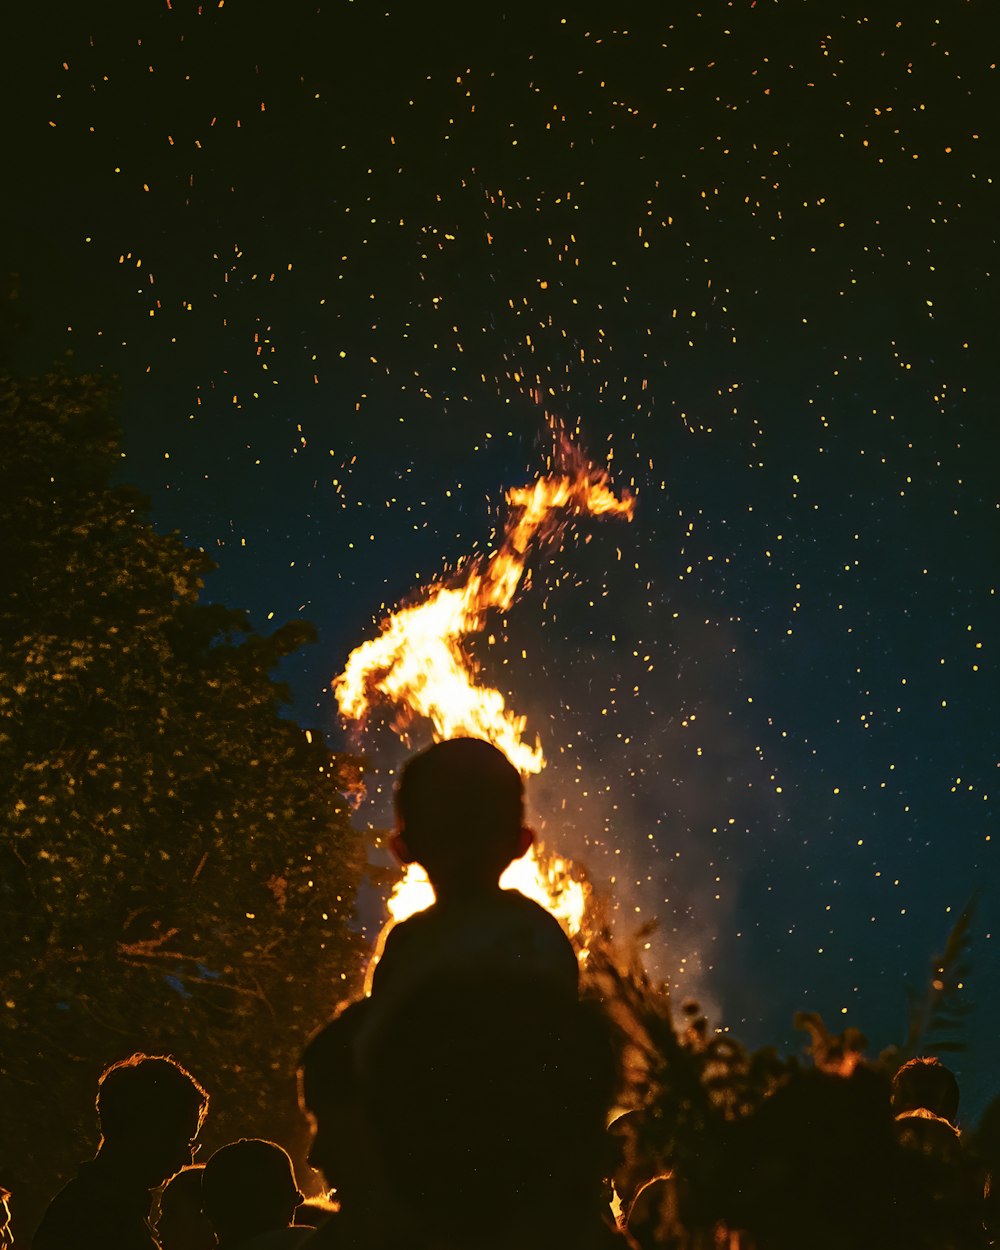 silhouette of people looking on fire under starry night